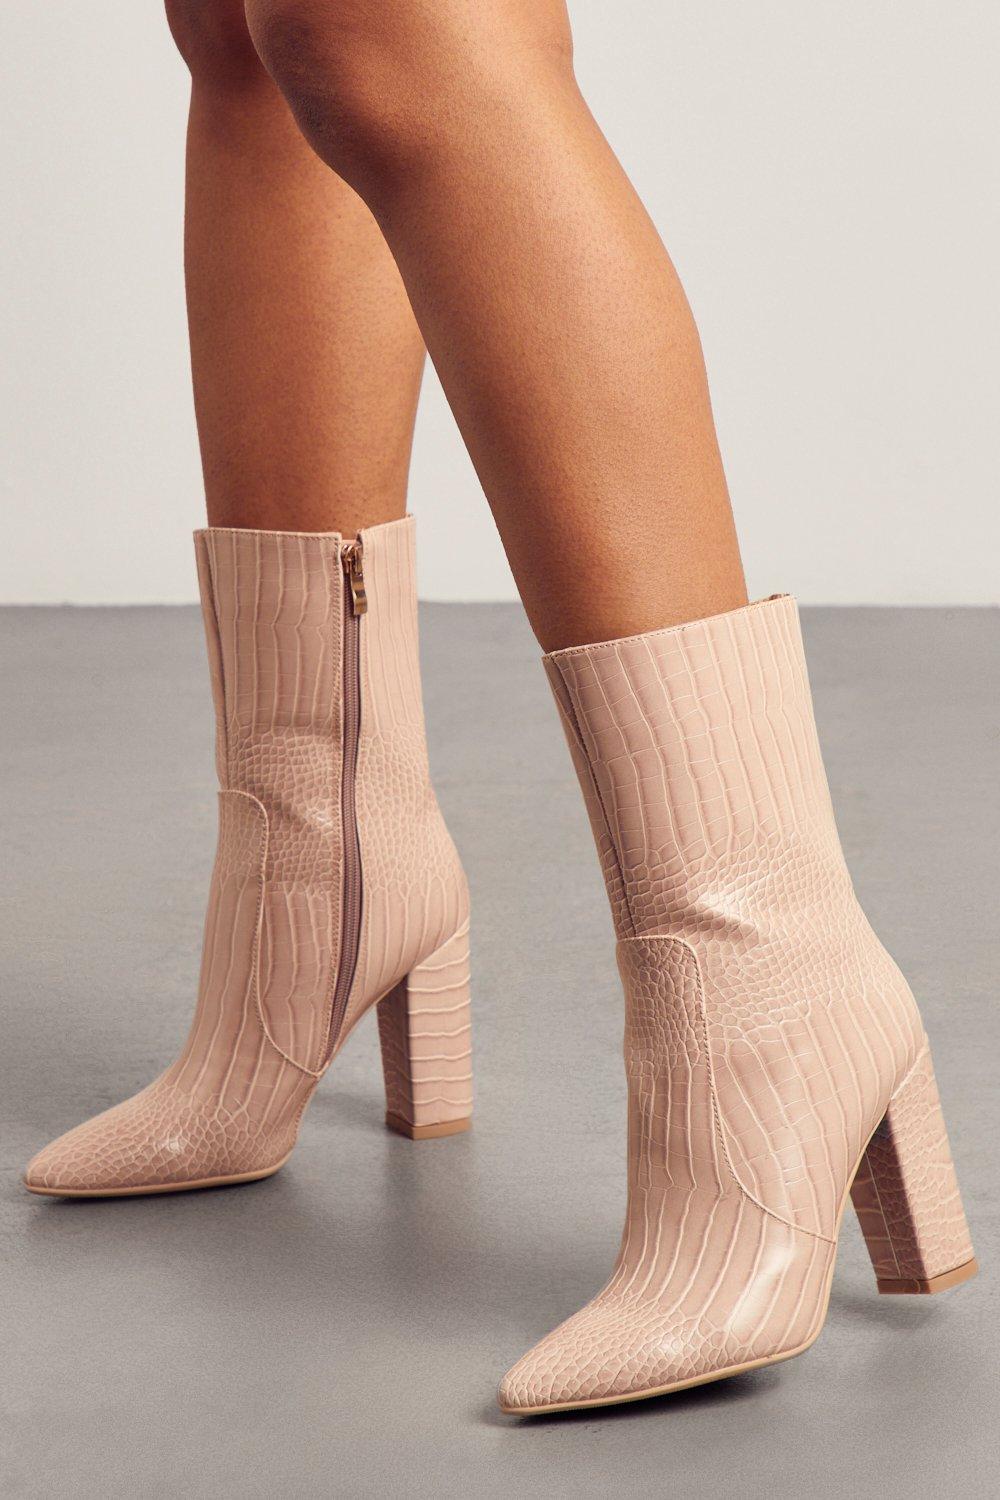 womens croc heeled ankle boots - nude - 3, nude